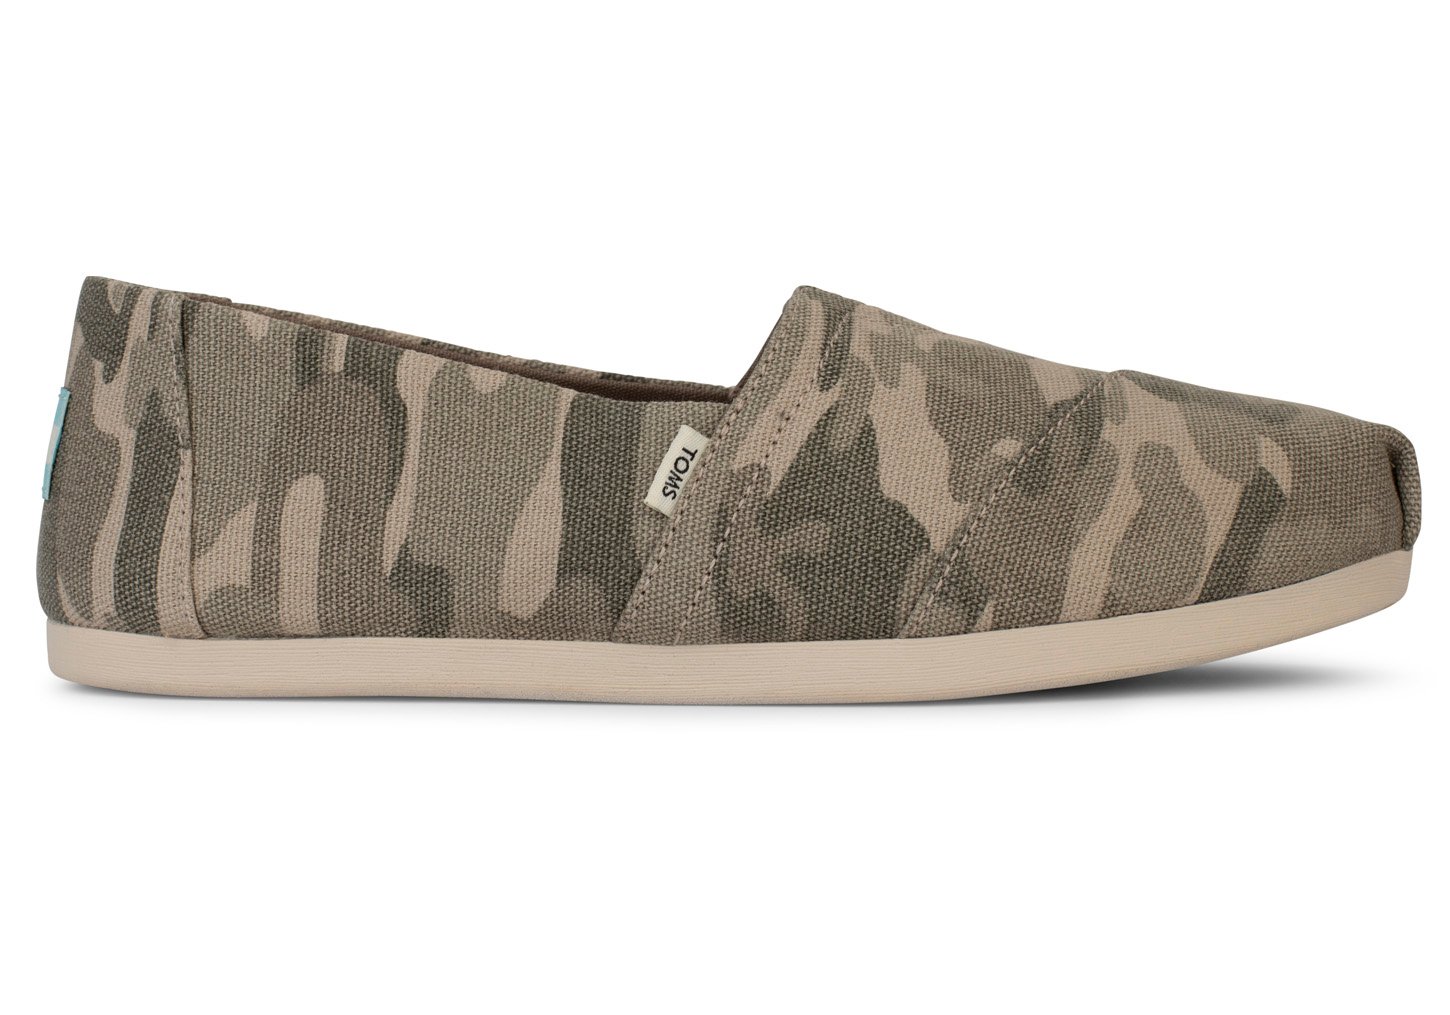 Does Toms Make A Camouflage Shoe? - Shoe Effect